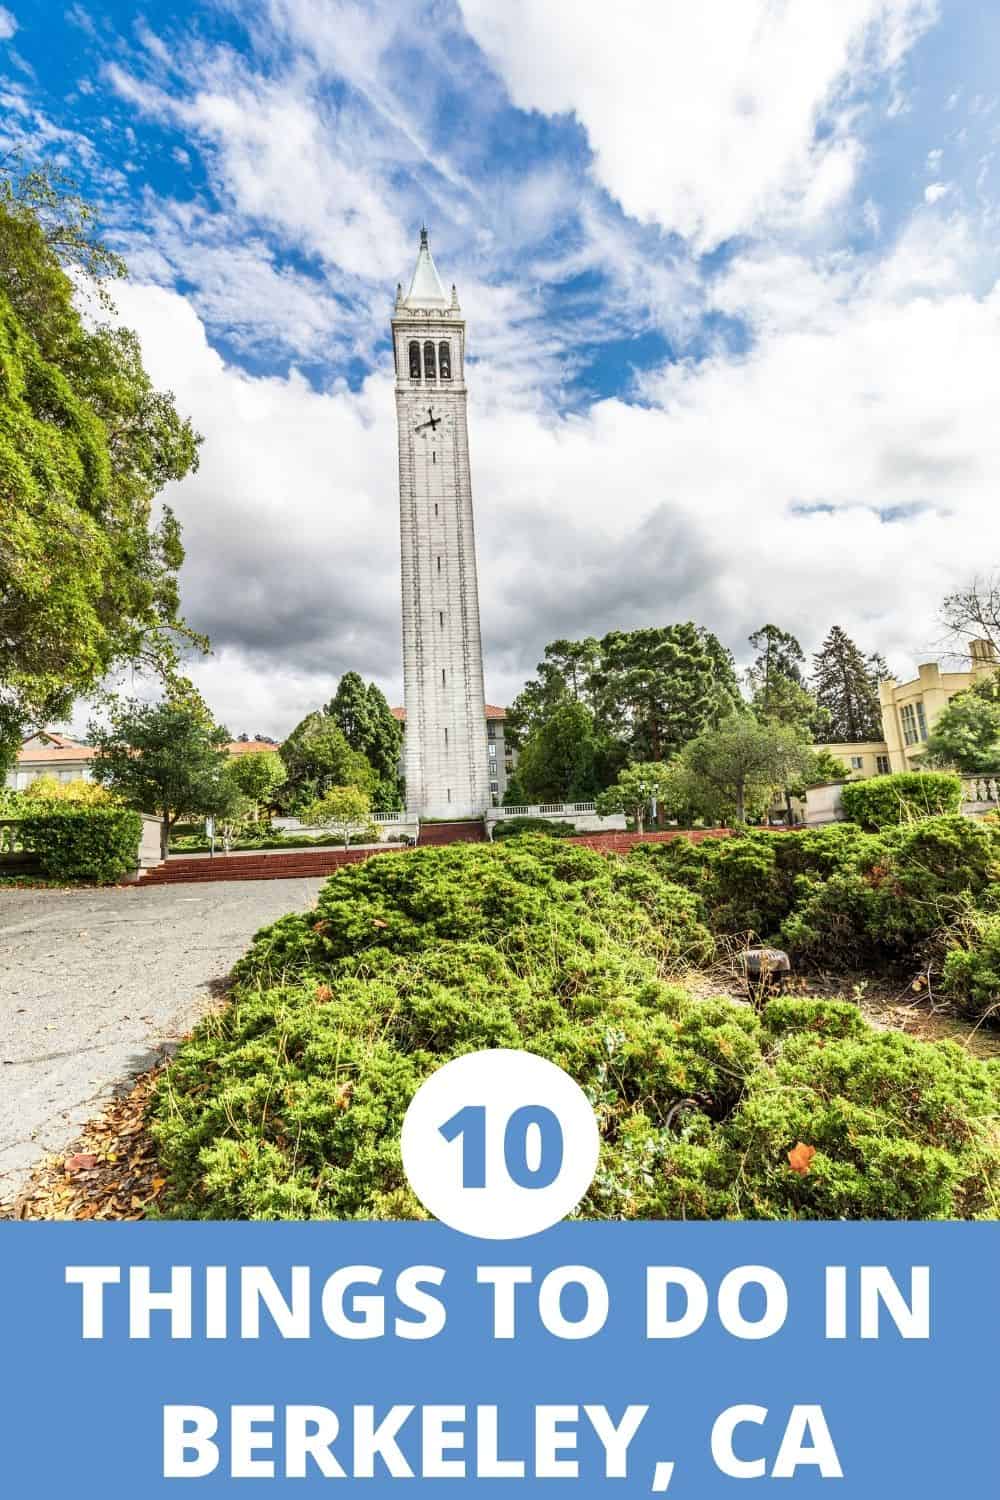 Set across from sparkling San Francisco Bay, Berkeley is a socially diverse city with a welcoming vibe. Here are 10 things to do in Berkeley. #berkeleycalifornia #berkeleyuniversity